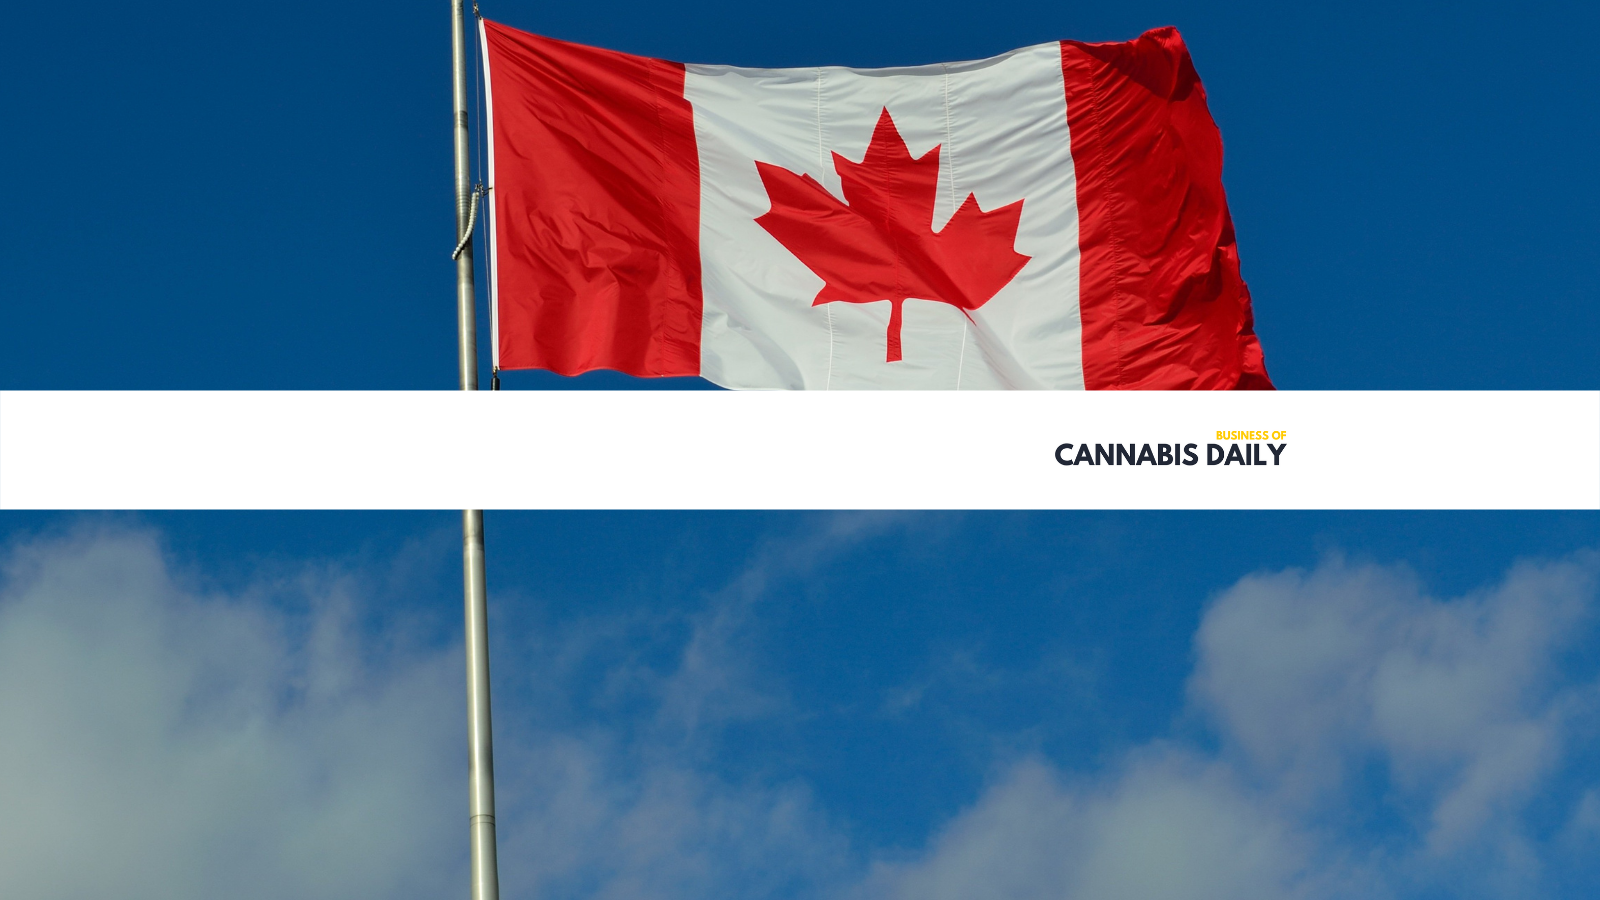 canadian cannabis sales at the top of the cannabis news